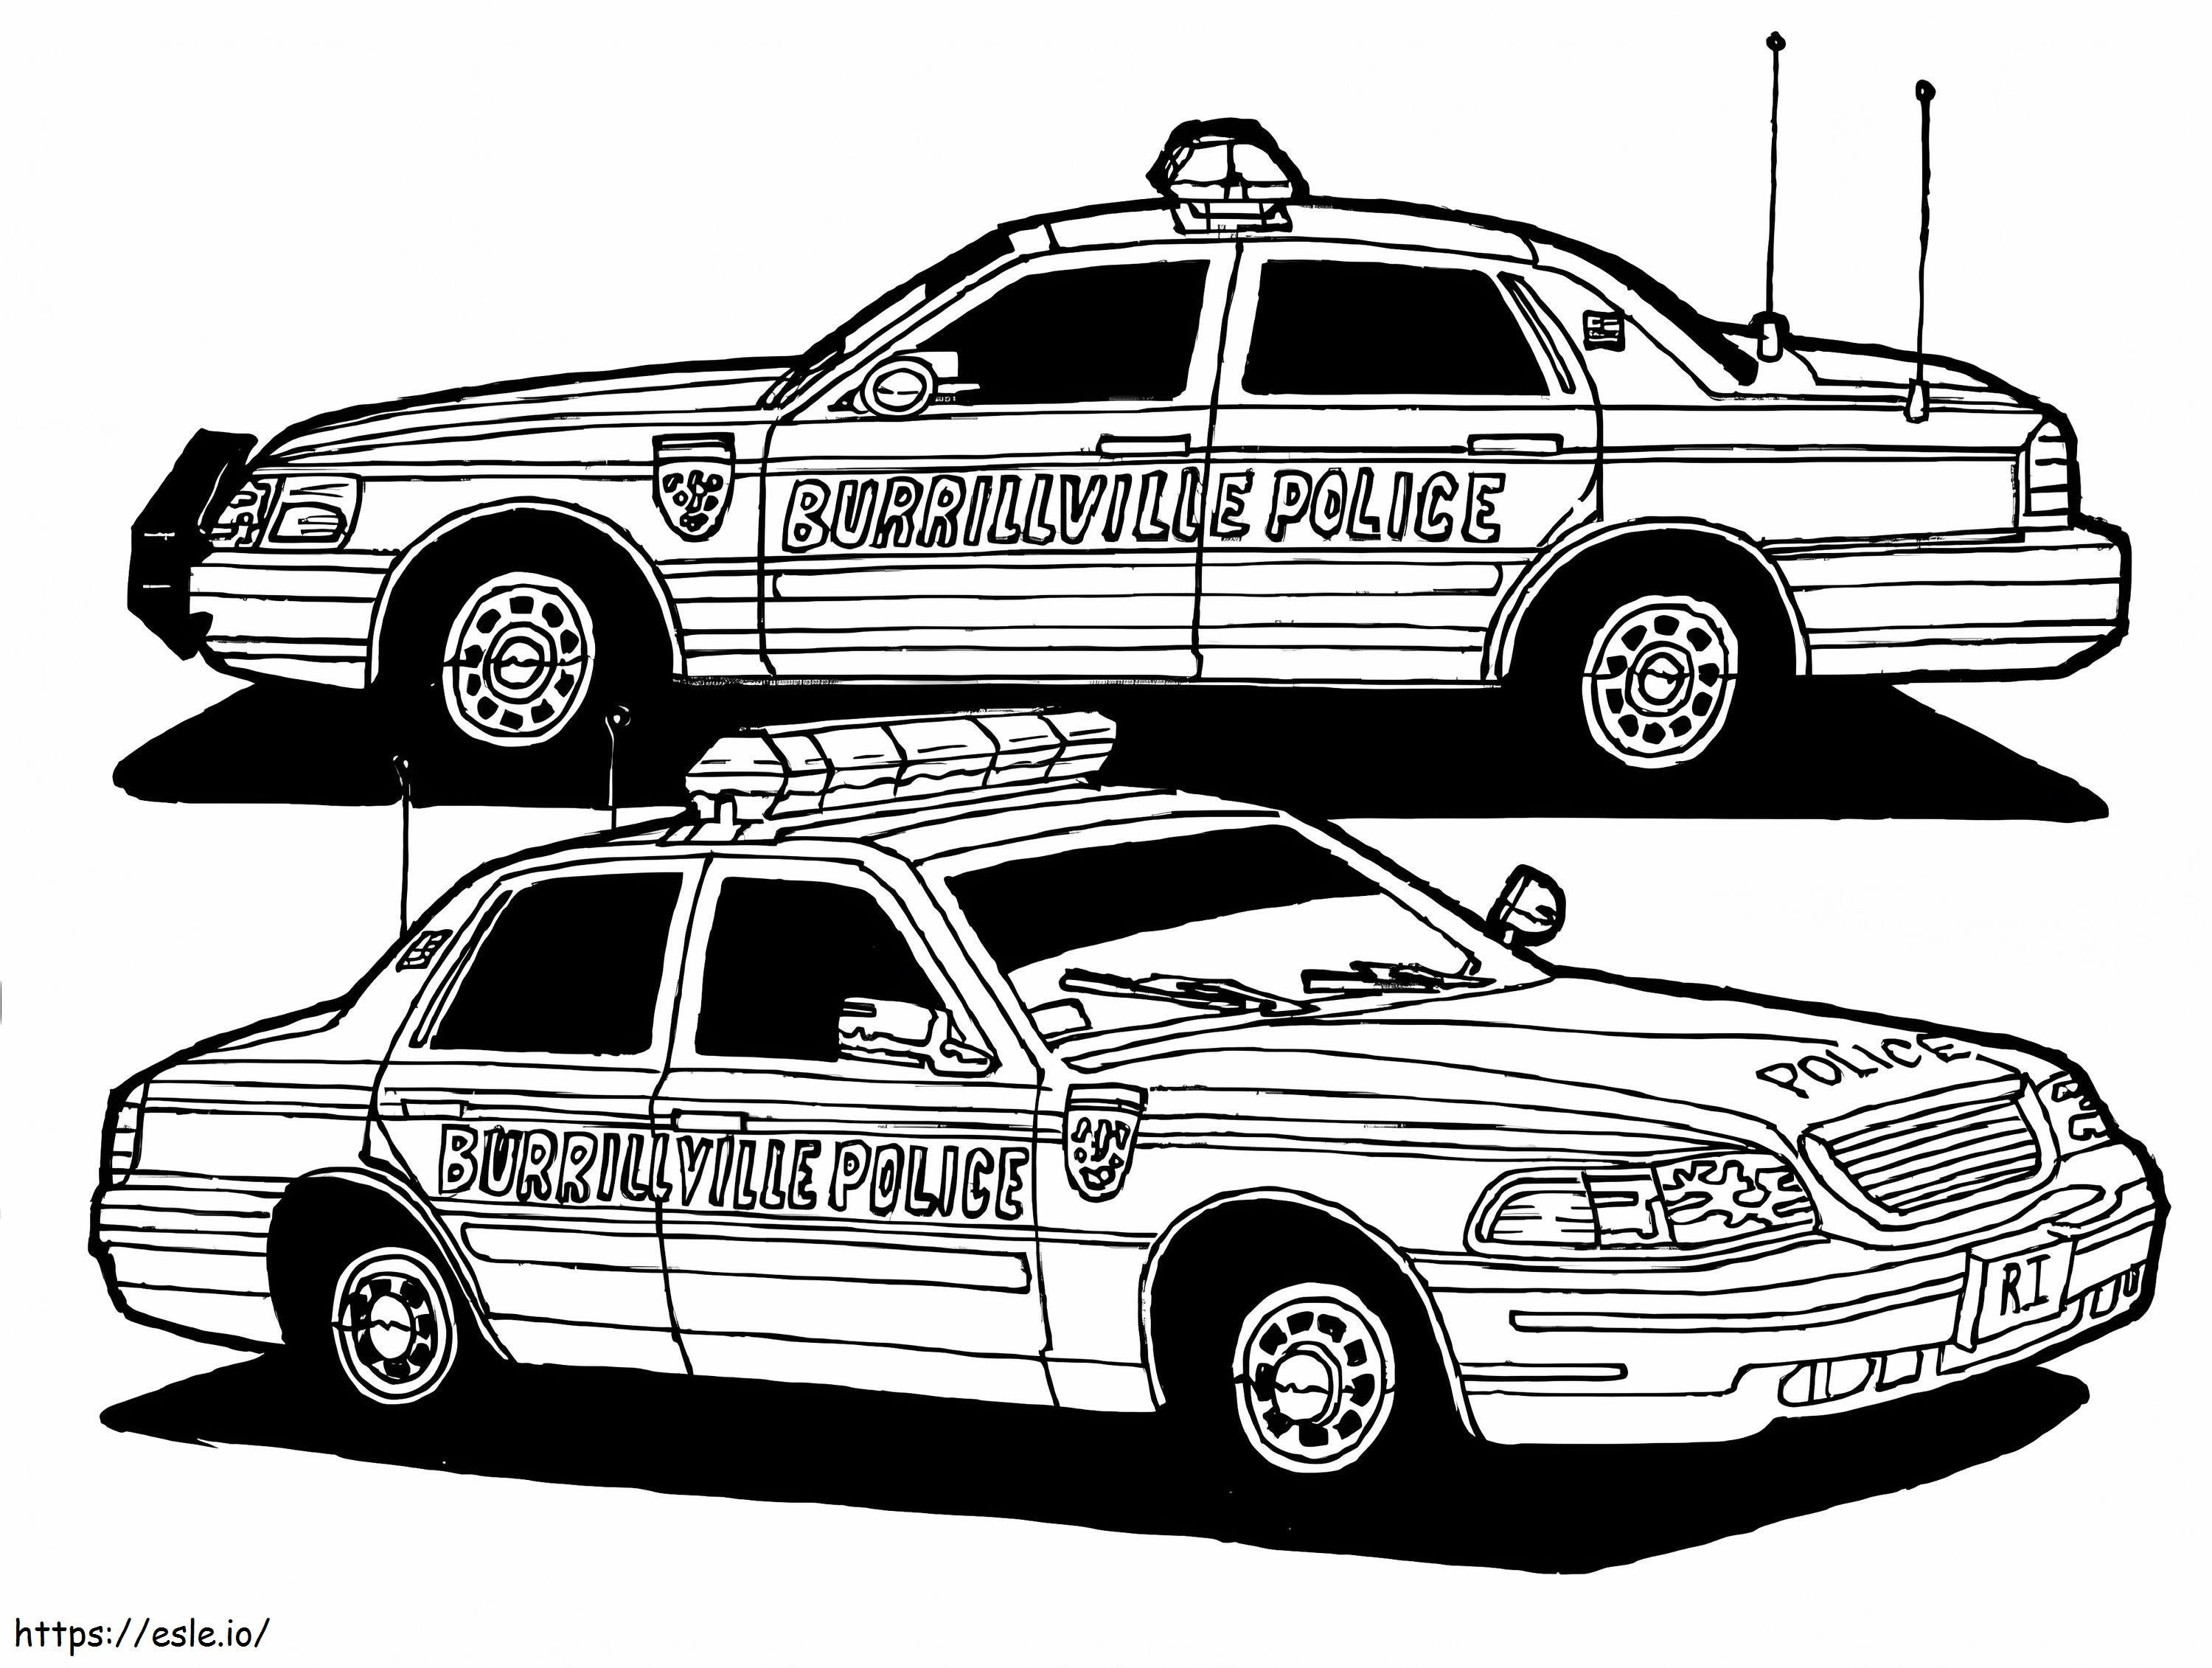 Two Police Cars coloring page